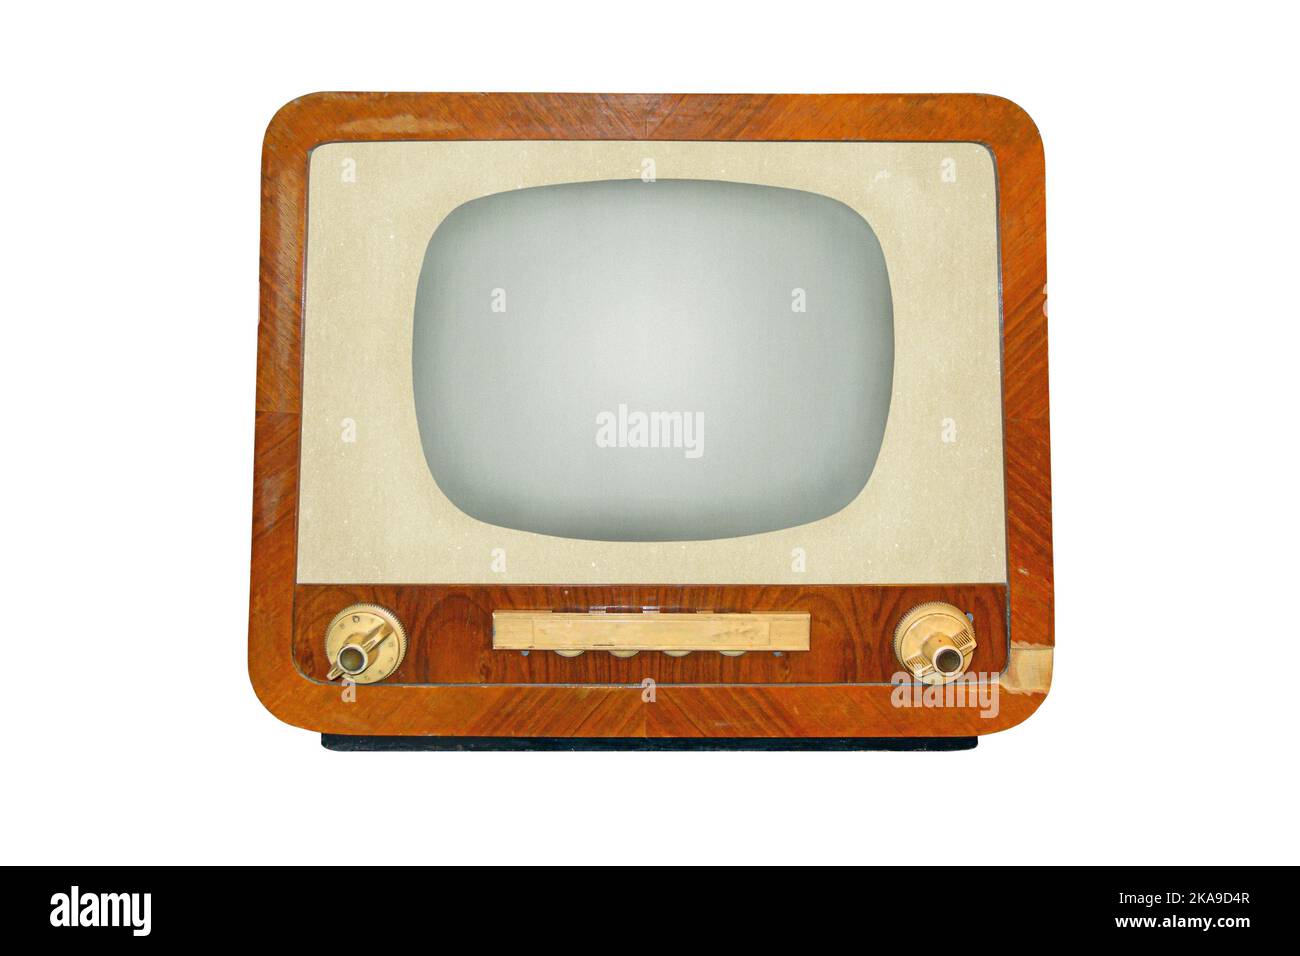 Old retro CRT television receiver isolated on white background, vintage analog TV technology Stock Photo